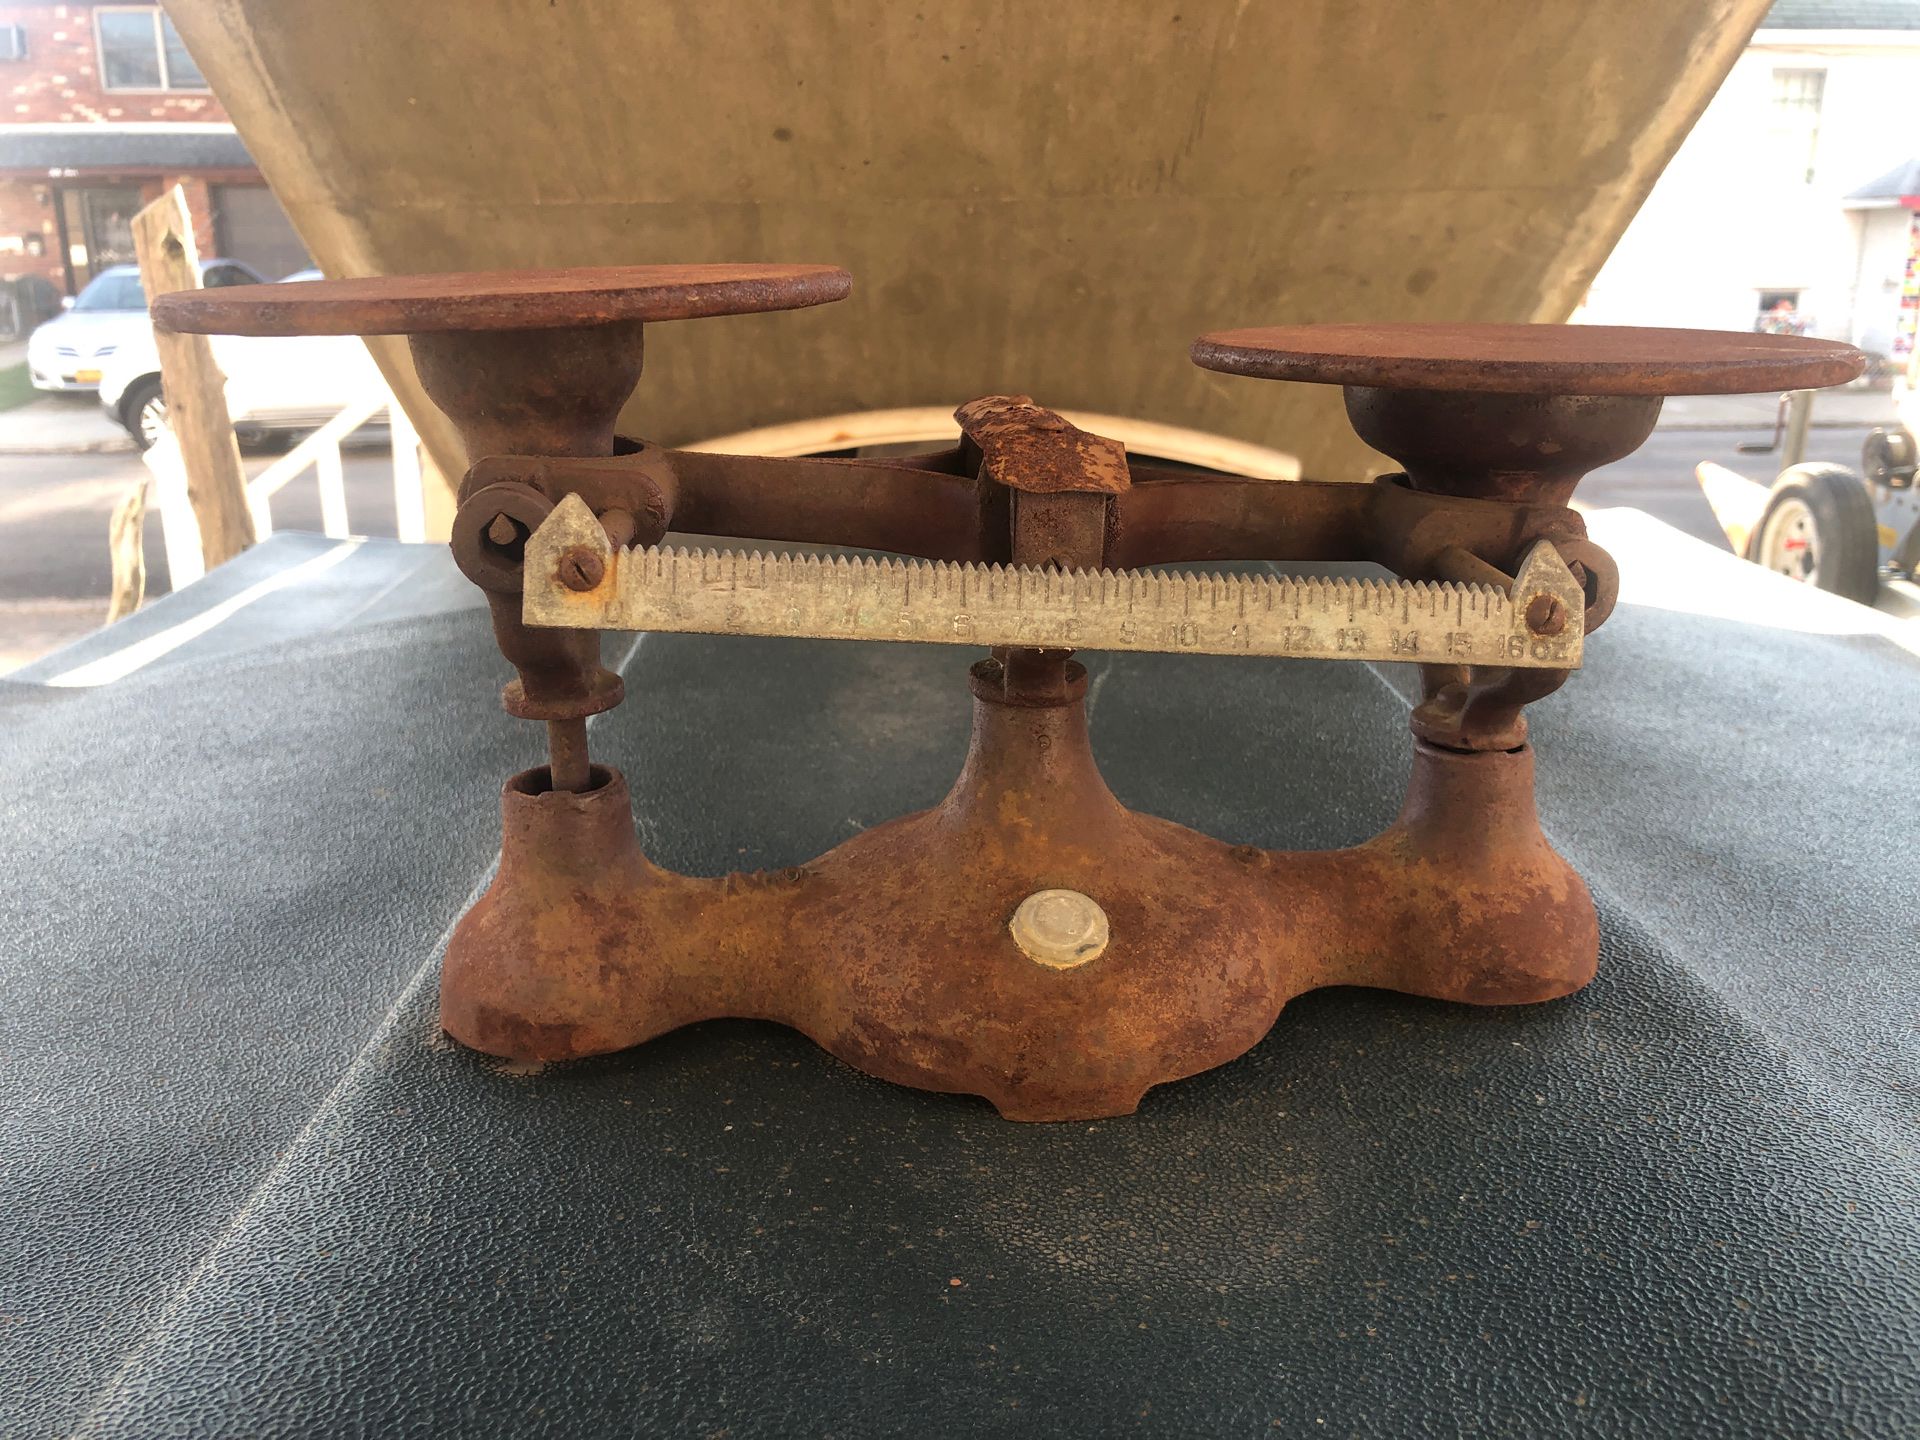 Antique scale from early 1900